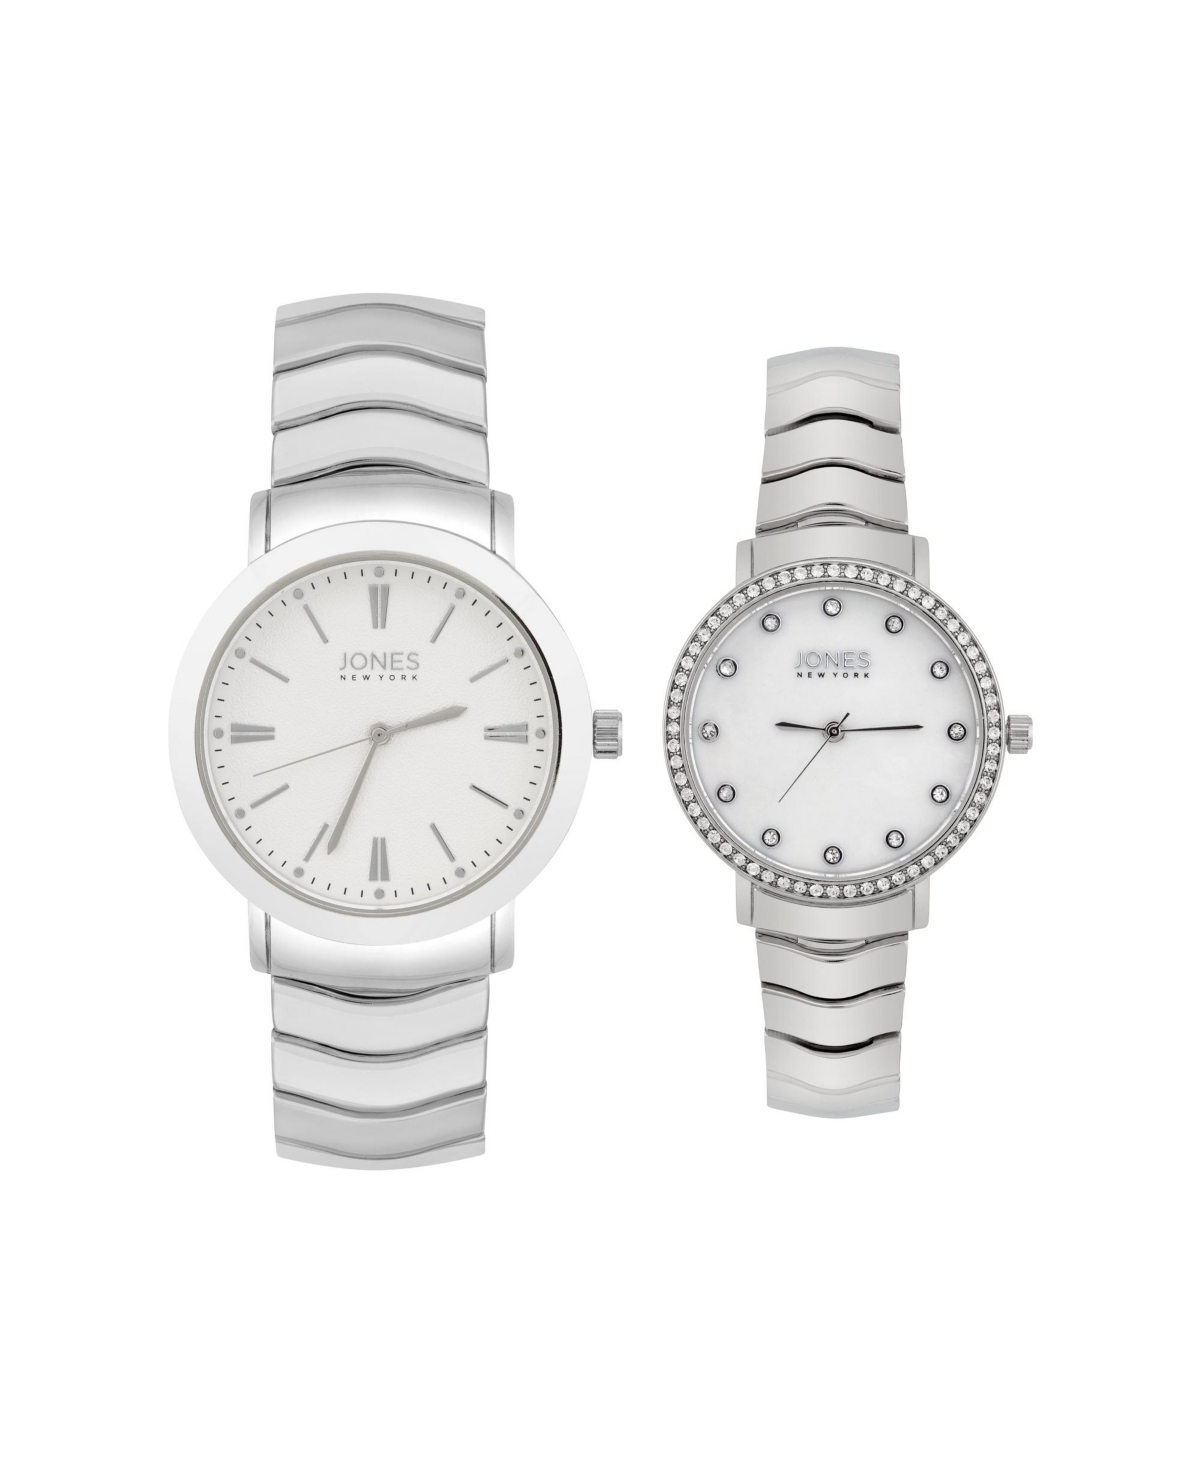 Men and Women's Quartz Silver Alloy Watch 34mm and 30mm - Silver